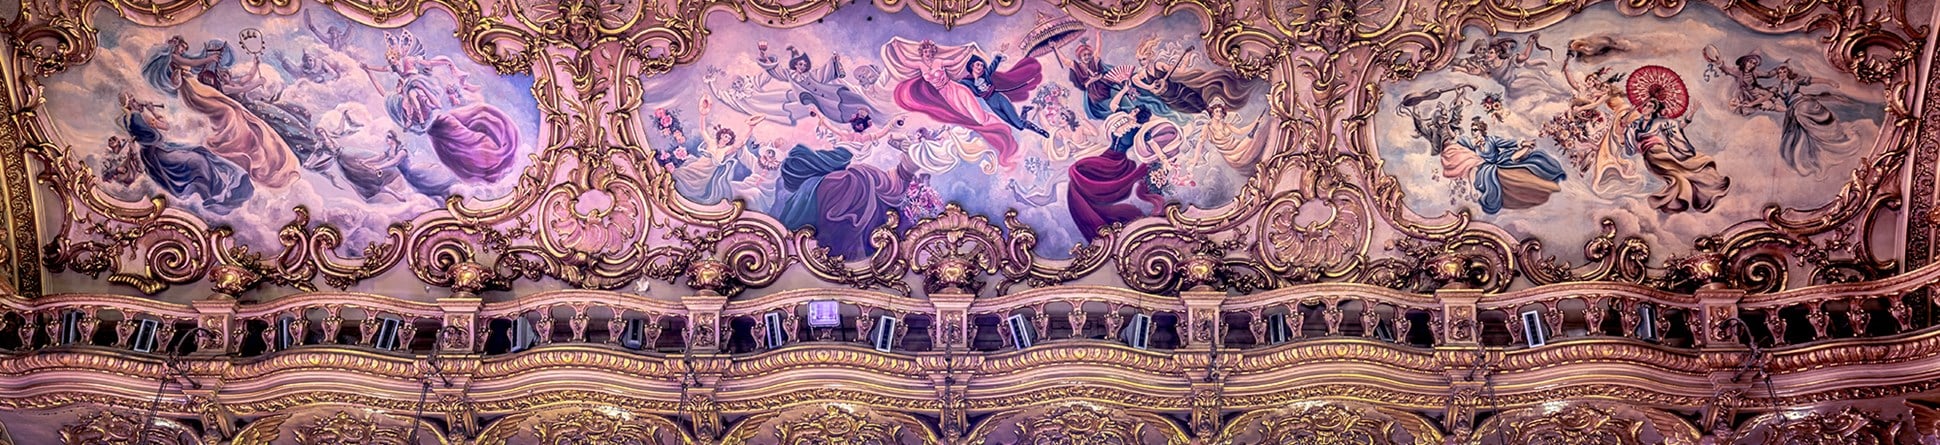 Detail of the ceiling inside Blackpool Tower Ballroom